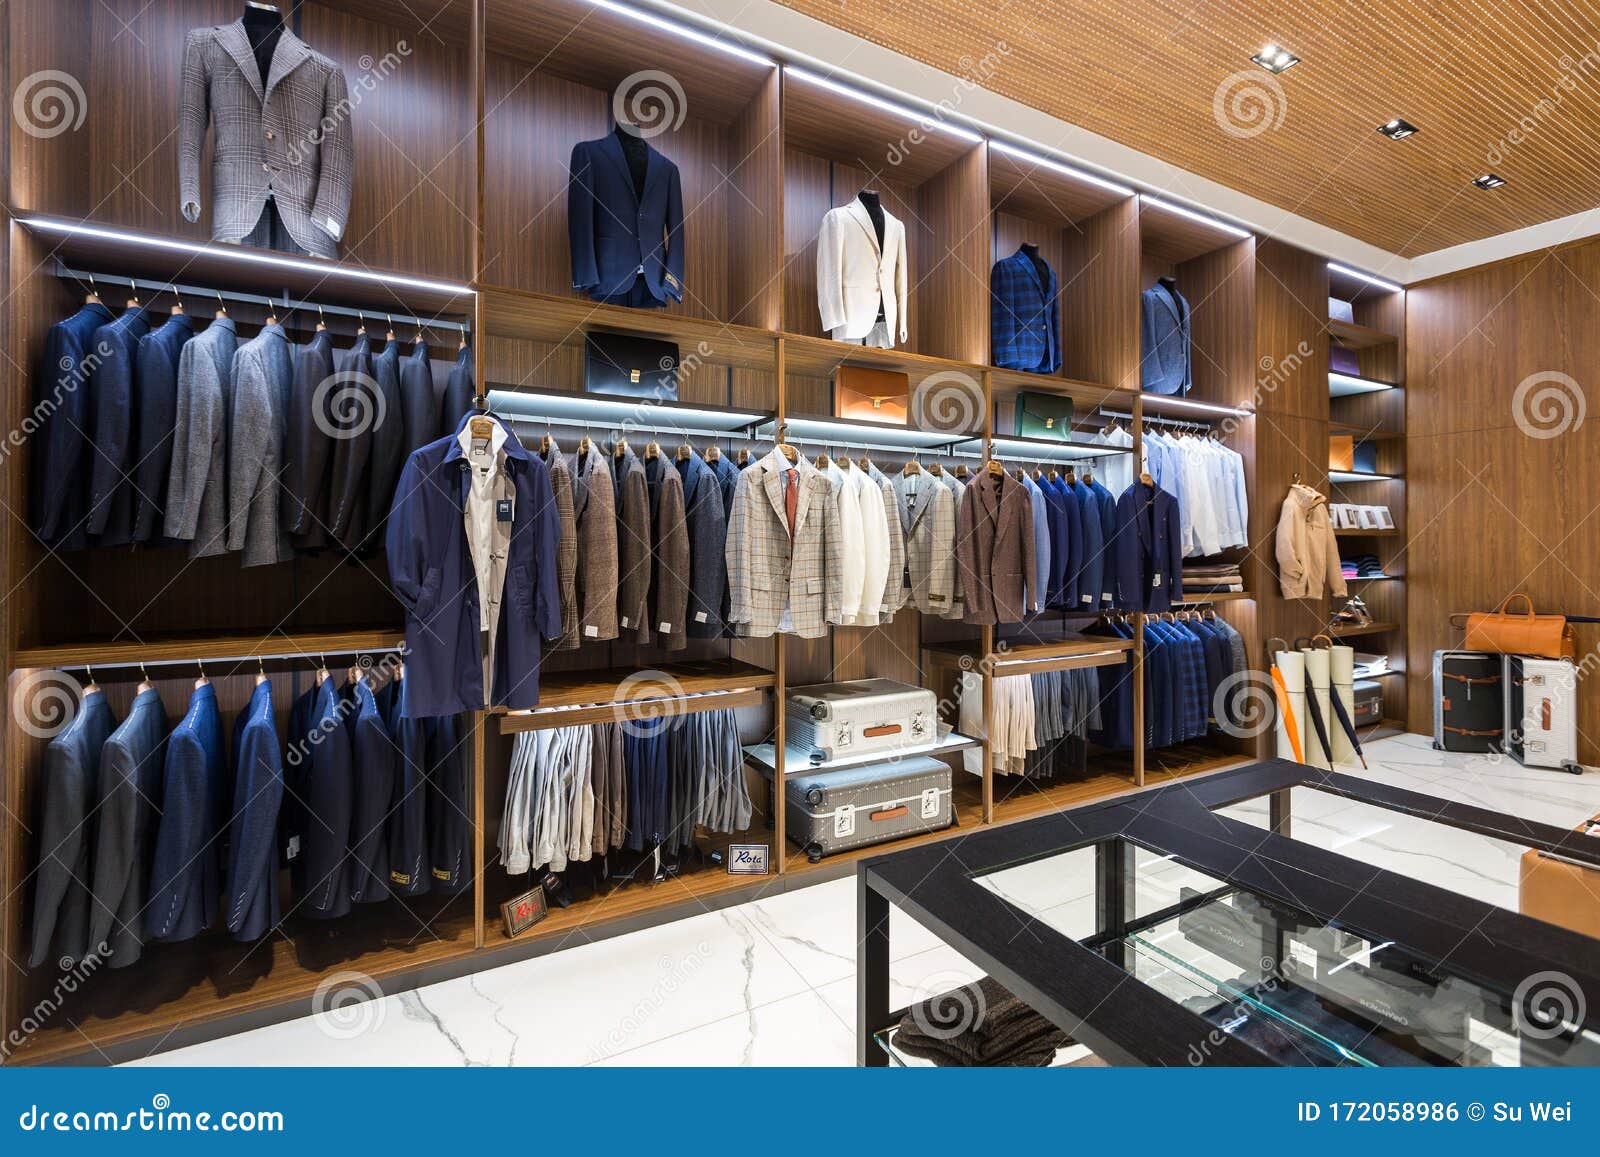 Stylish Men S Clothes in Shop. Stock Photo - Image of elegance ...